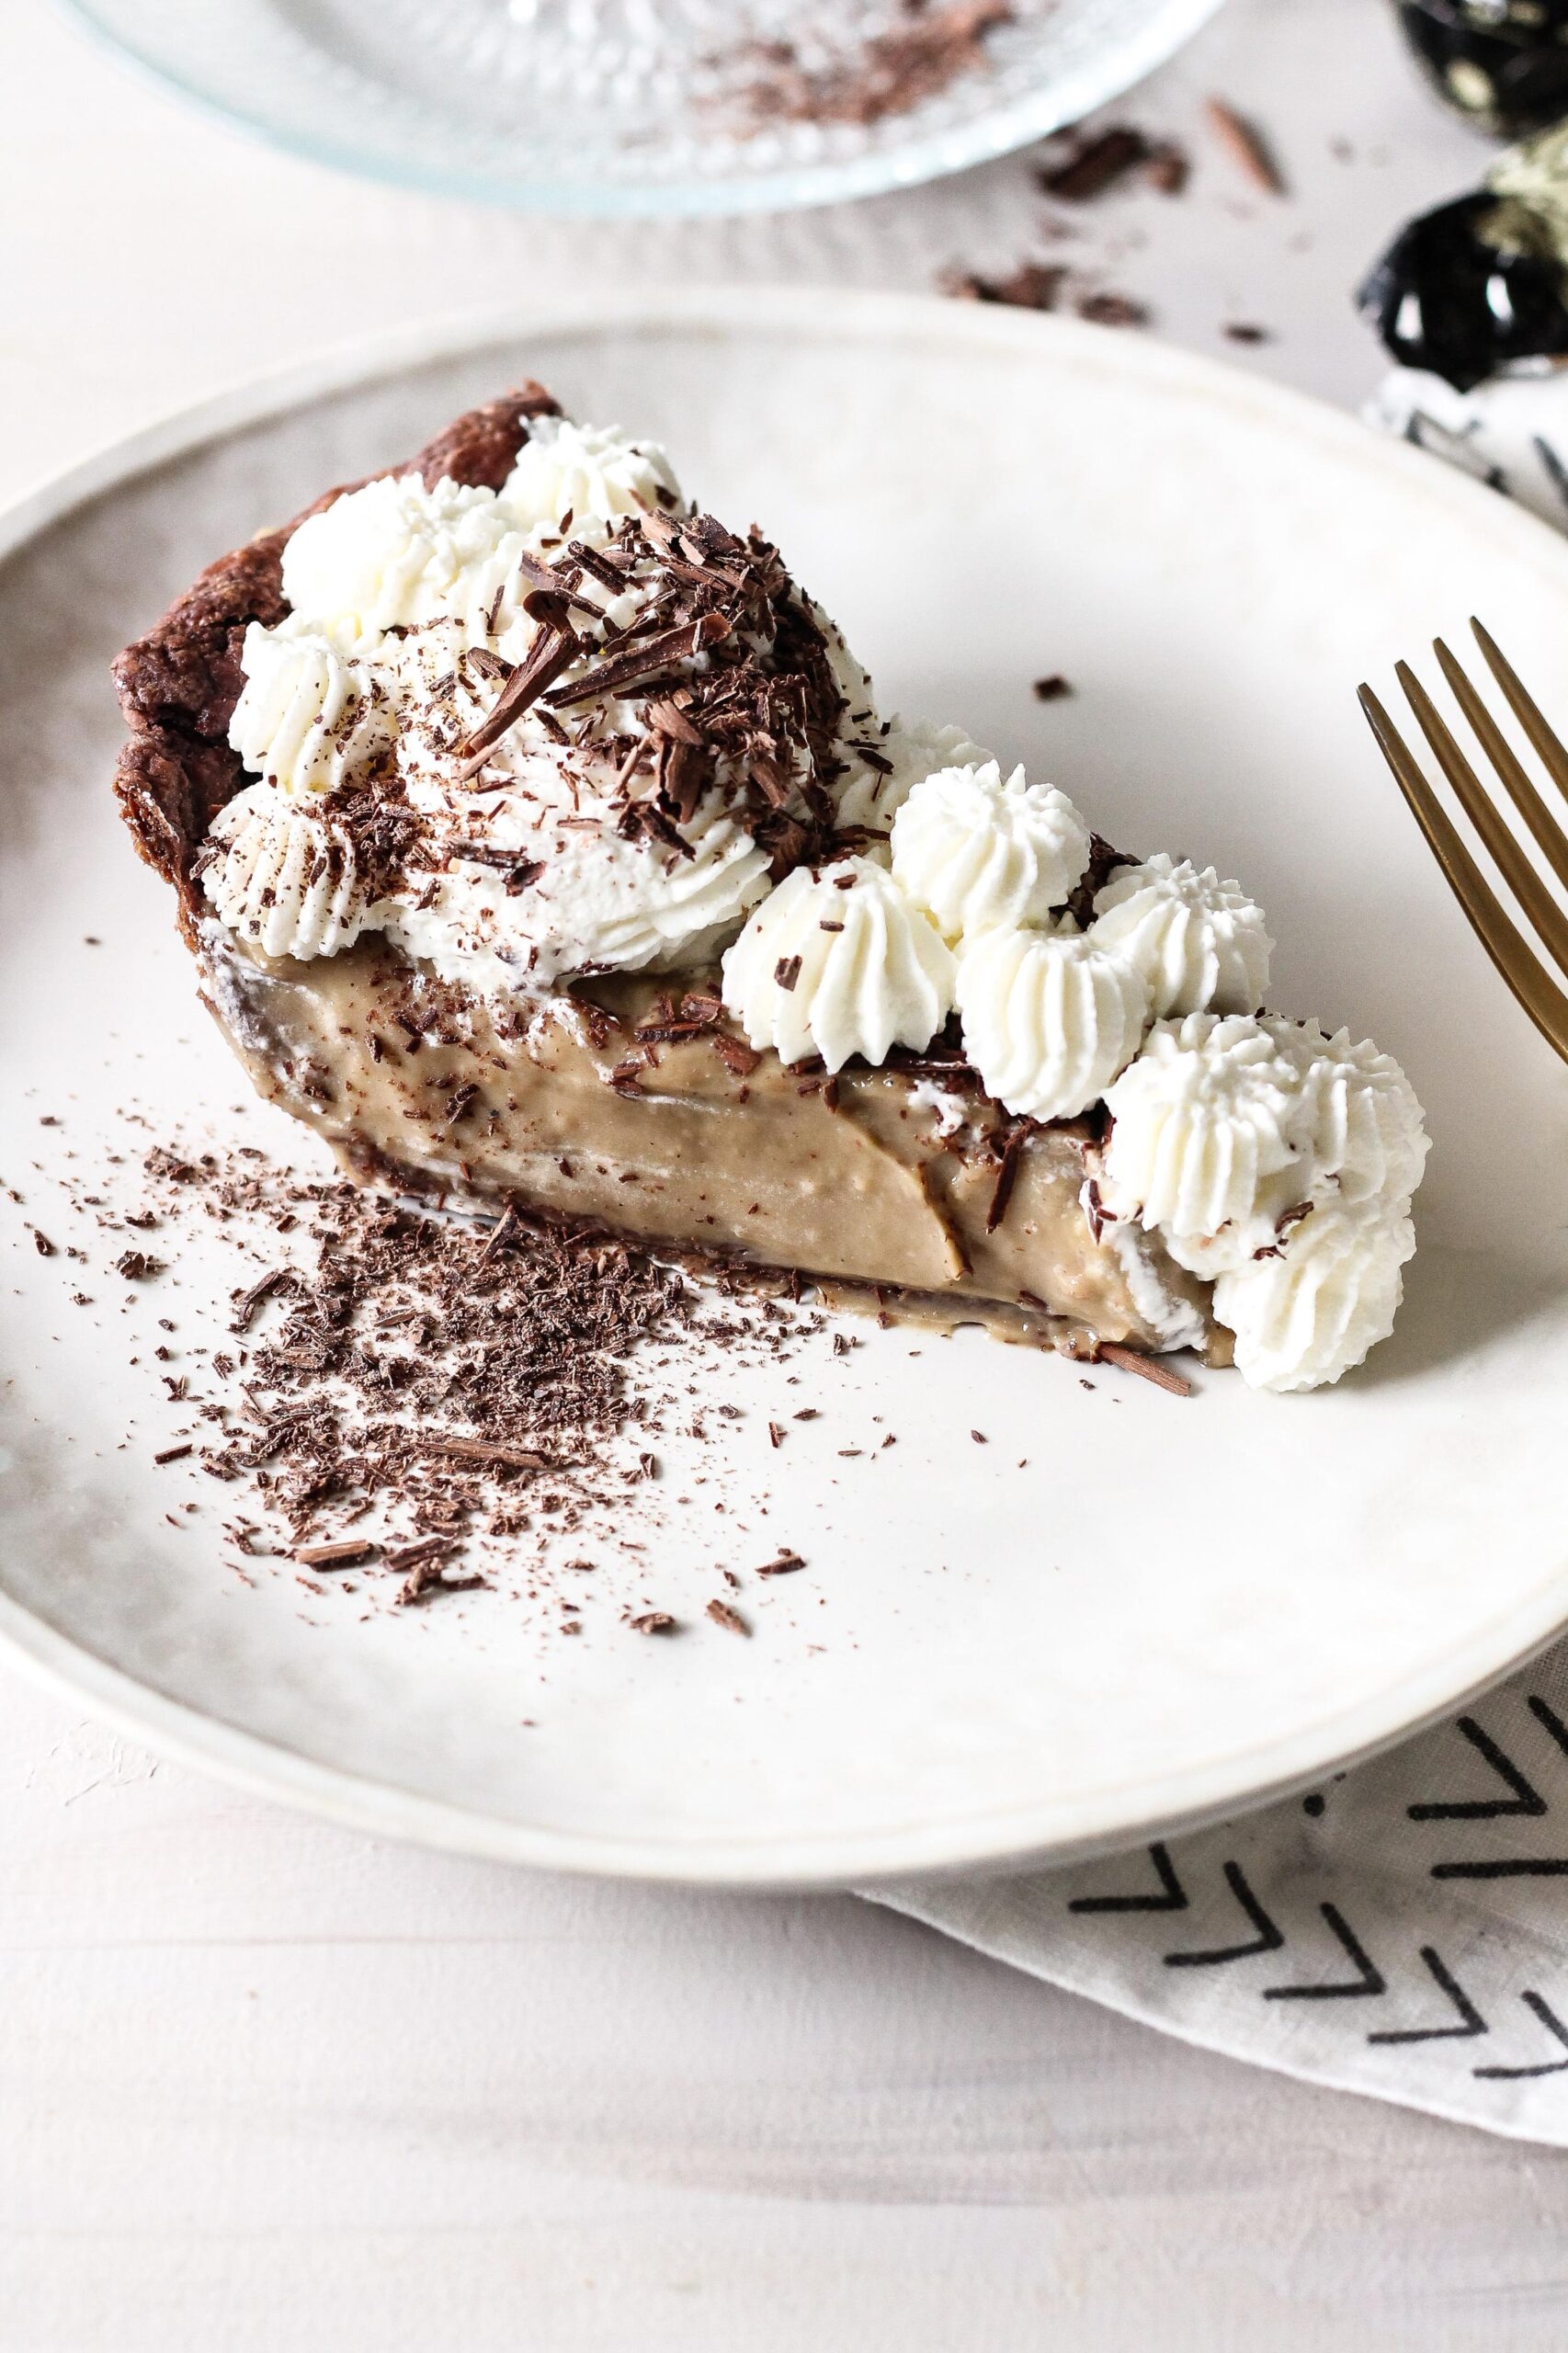  Sink your teeth into this heavenly coffee and cream pie!